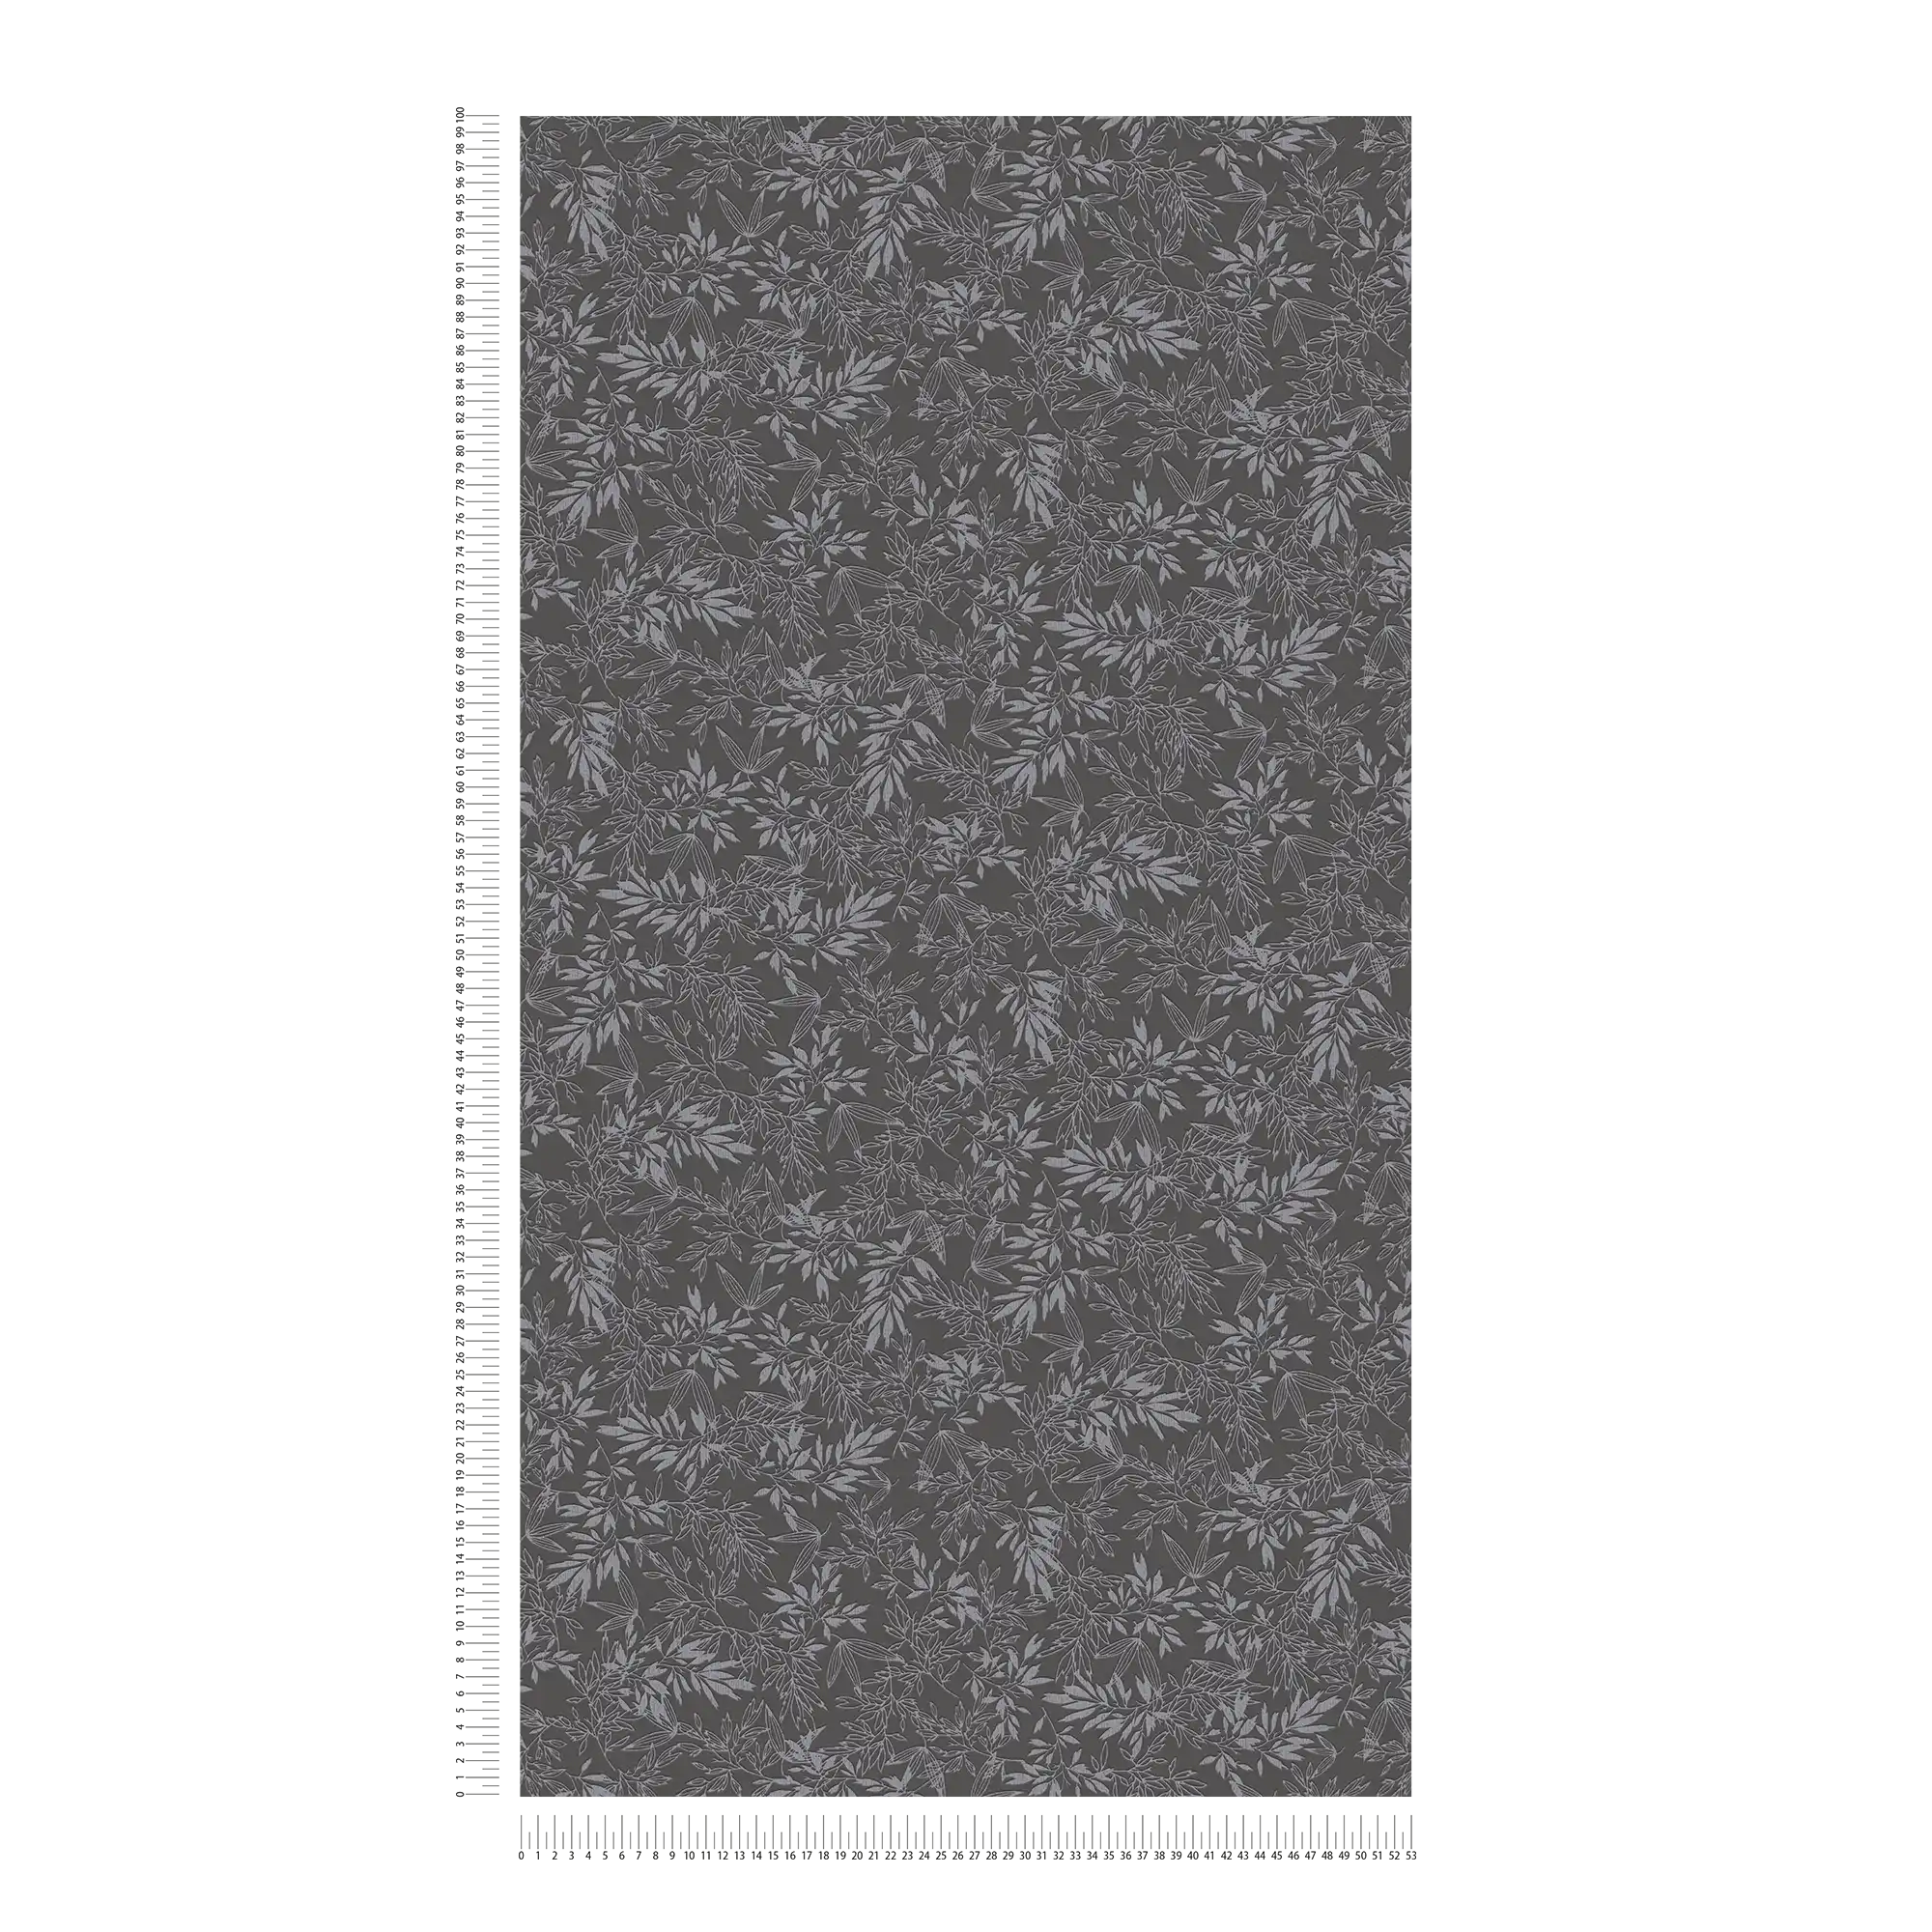             Wallpaper with leaves motif and foam structure - black, grey
        